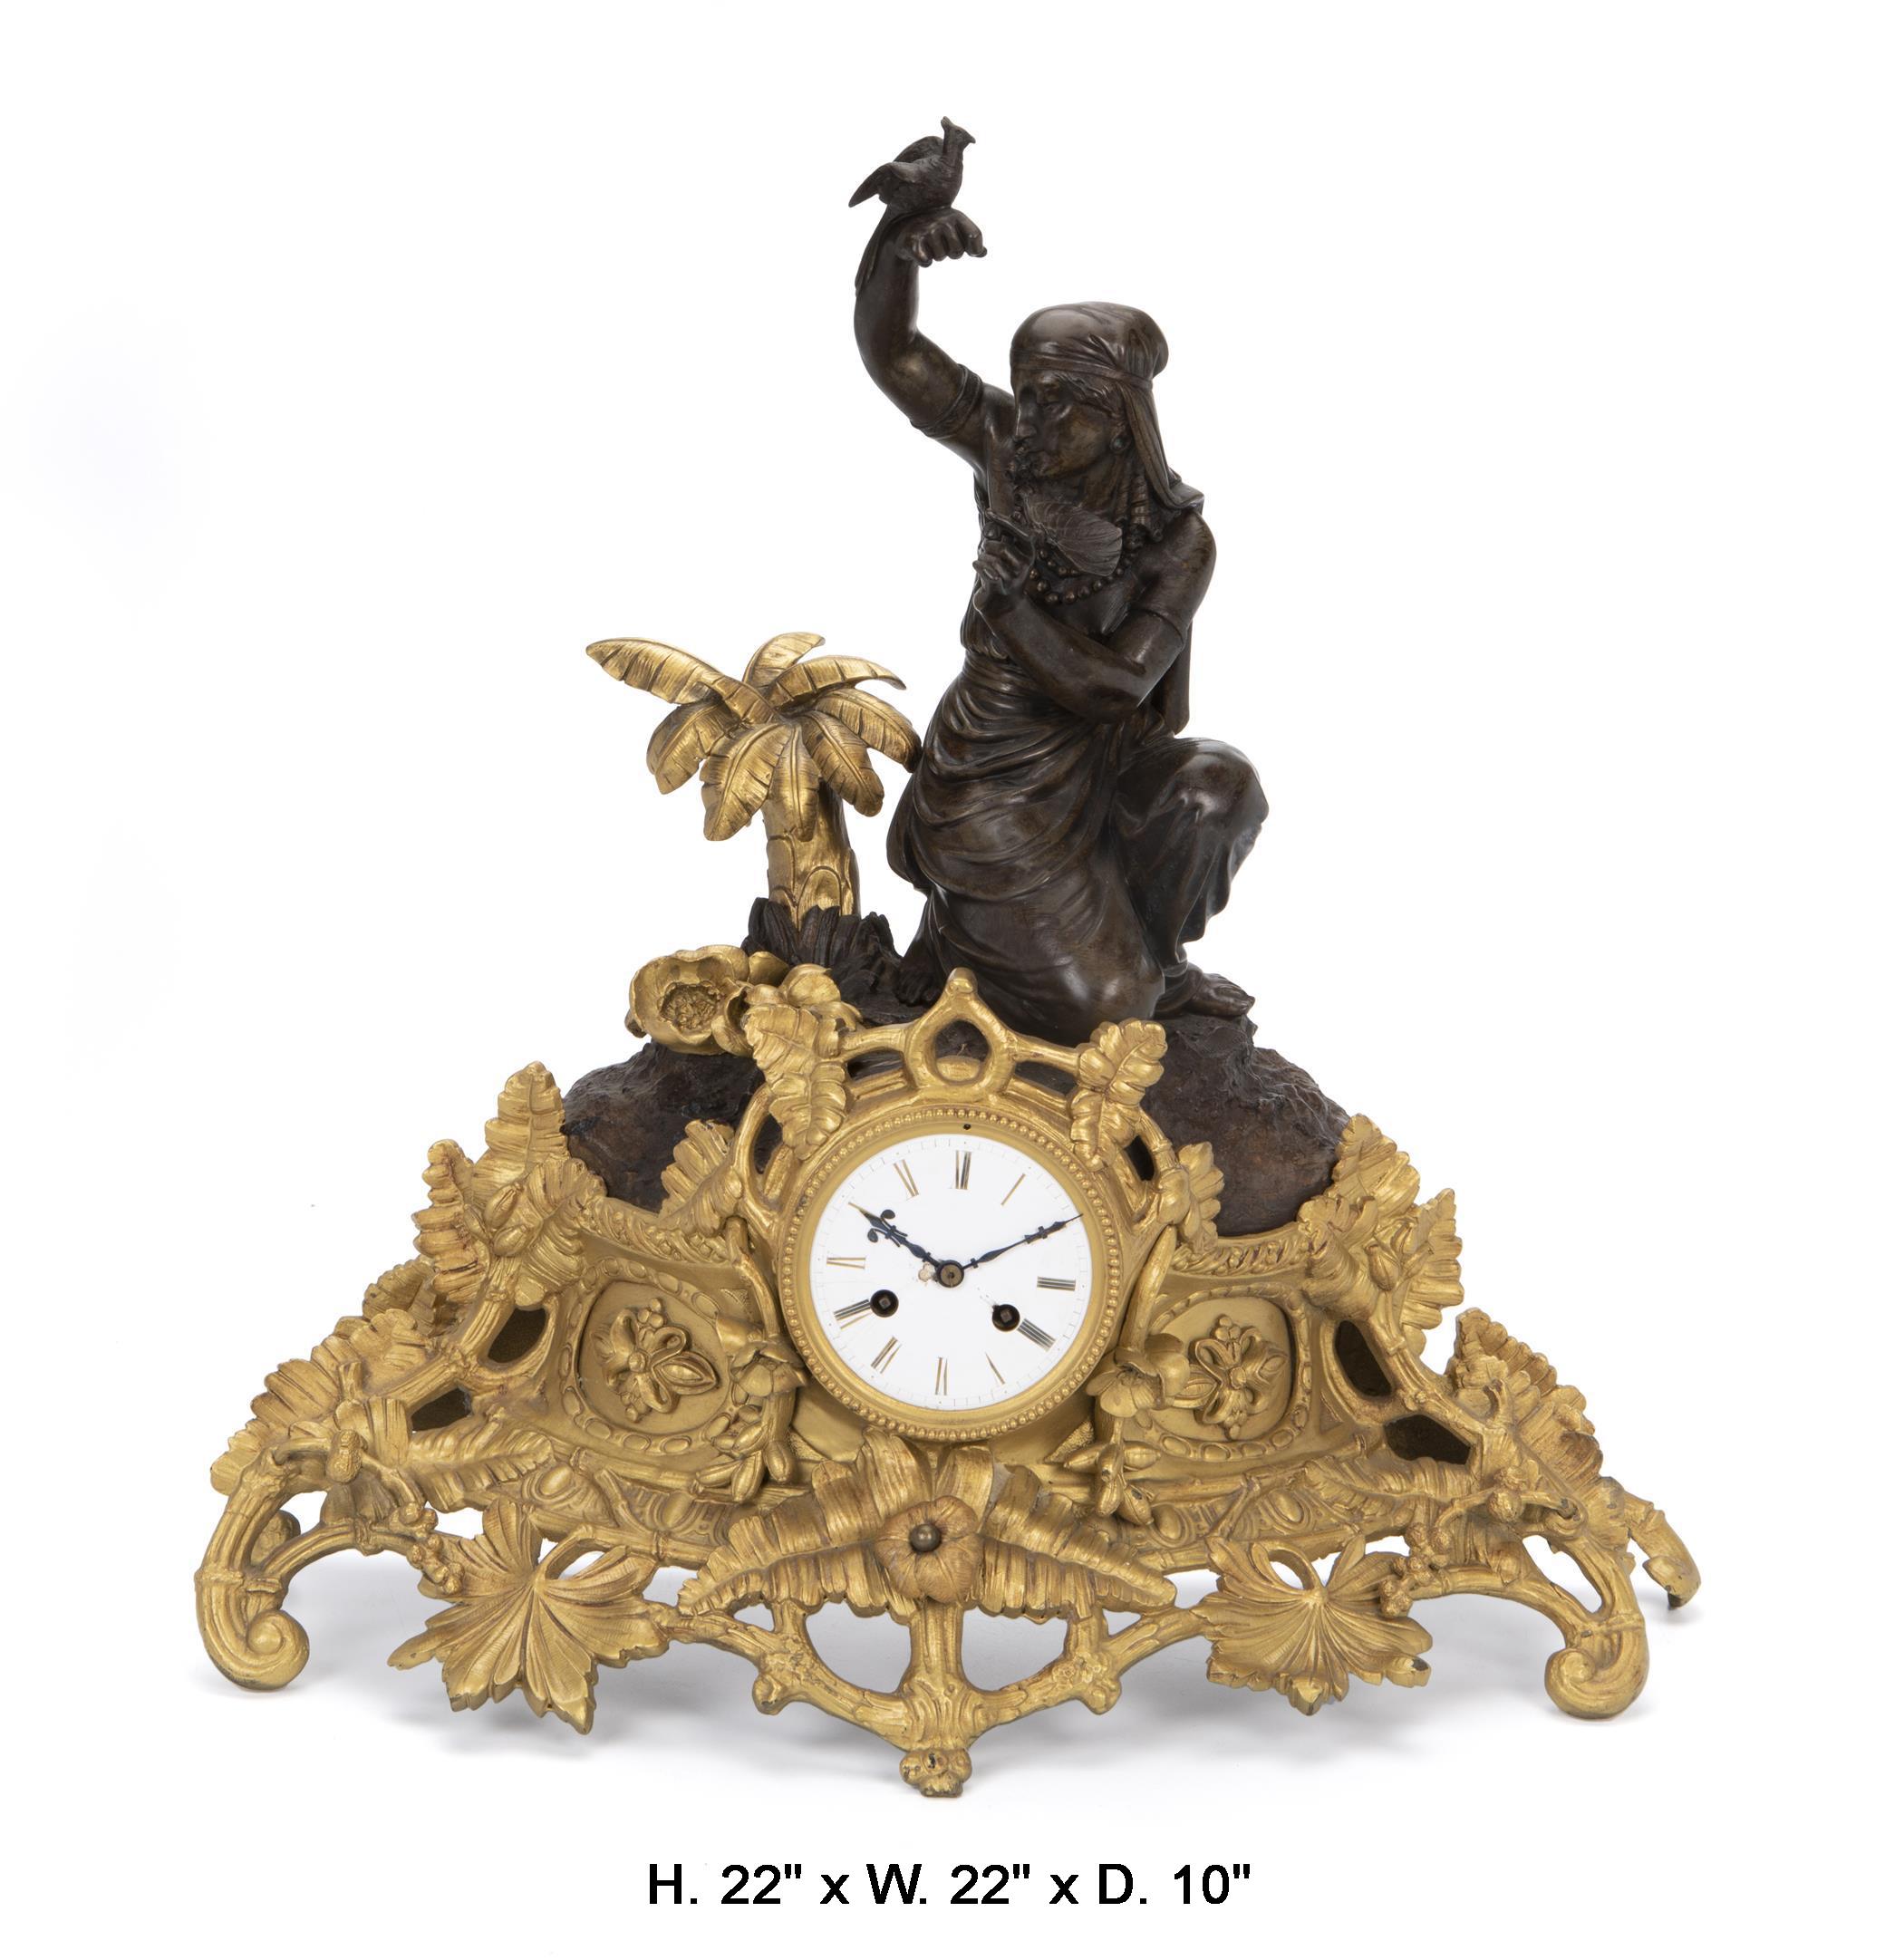 Impressive 19th century French gilt and patinated bronze figural clock signed Louis Sauvageau. 
The beautiful patinated bronze Egyptian Revival-style woman with a bird and a fan amid gilt palm trees and flowers seated on a gilt bronze foliate base